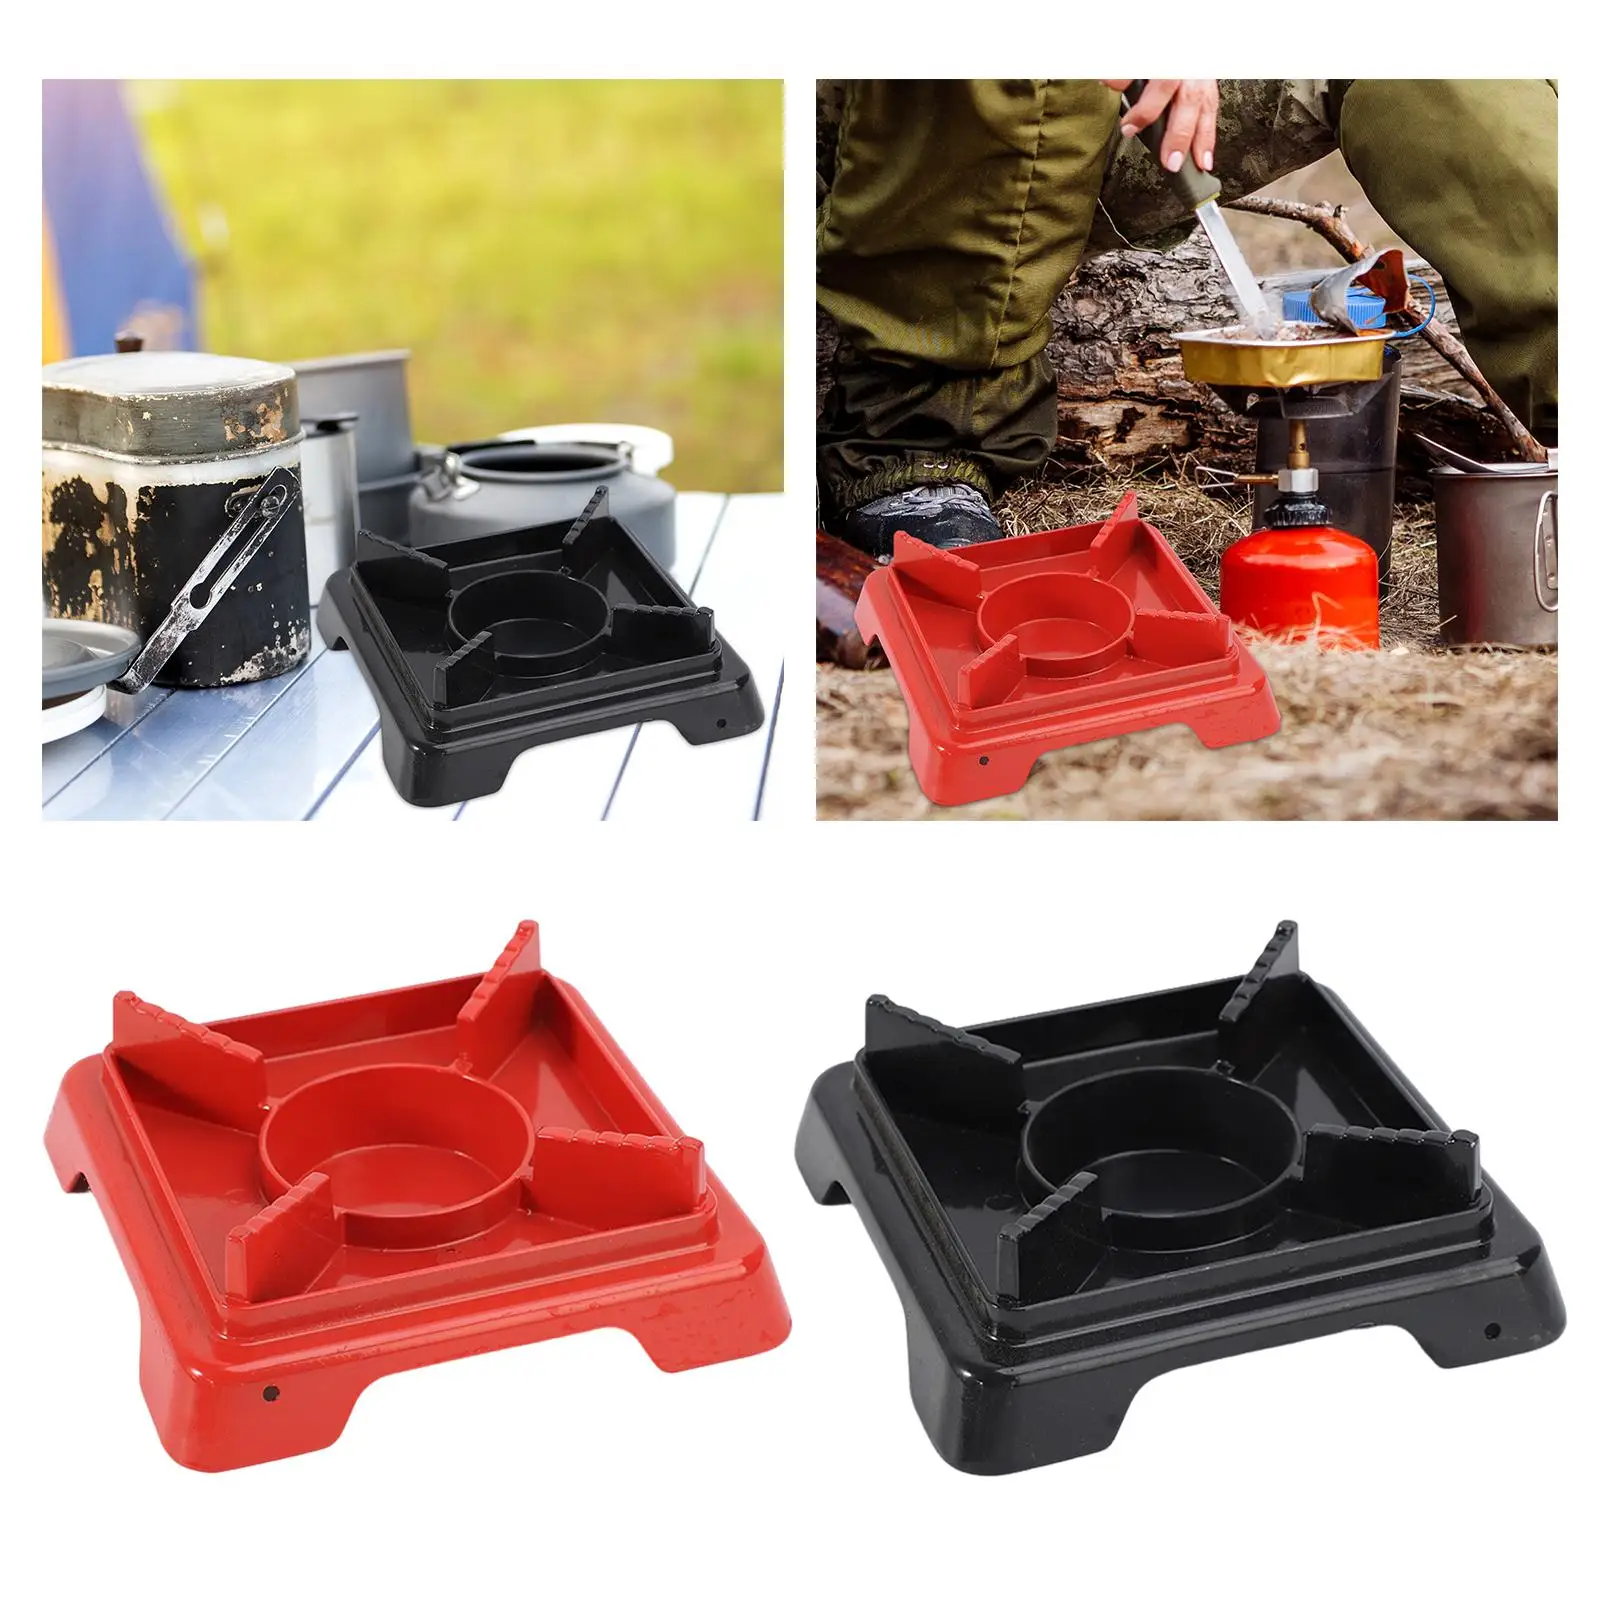 Camping Alcohol Stove Lightweight Food Heater Universal Cooking Tool for Outside Activities Travel Barbecue Hiking